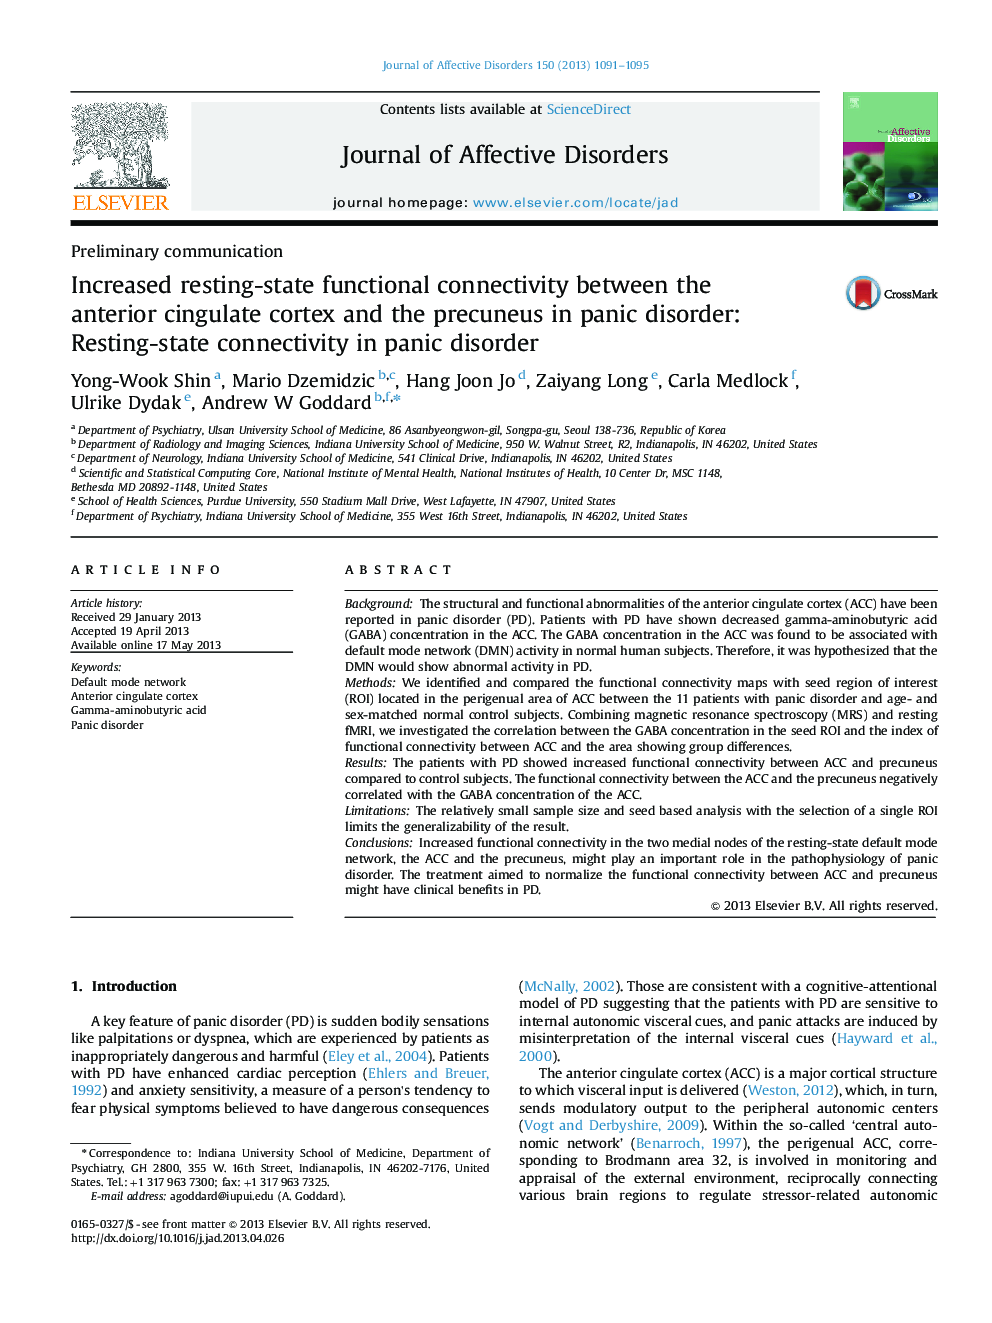 Increased resting-state functional connectivity between the anterior cingulate cortex and the precuneus in panic disorder:: Resting-state connectivity in panic disorder